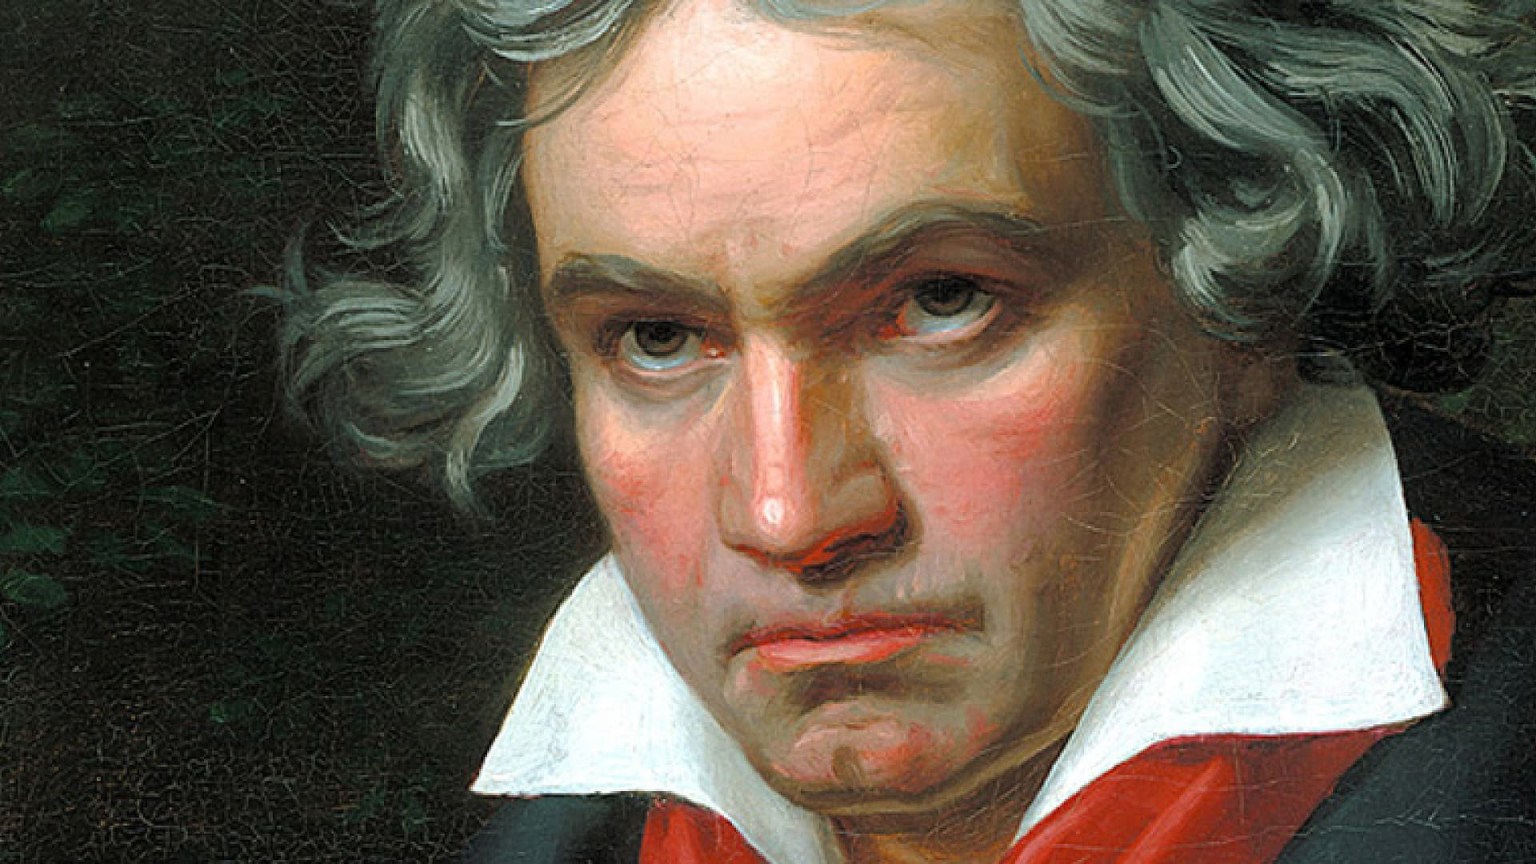 Beethoven Was A Classical Composer Who Was Increasingly Influenced By Romanticism